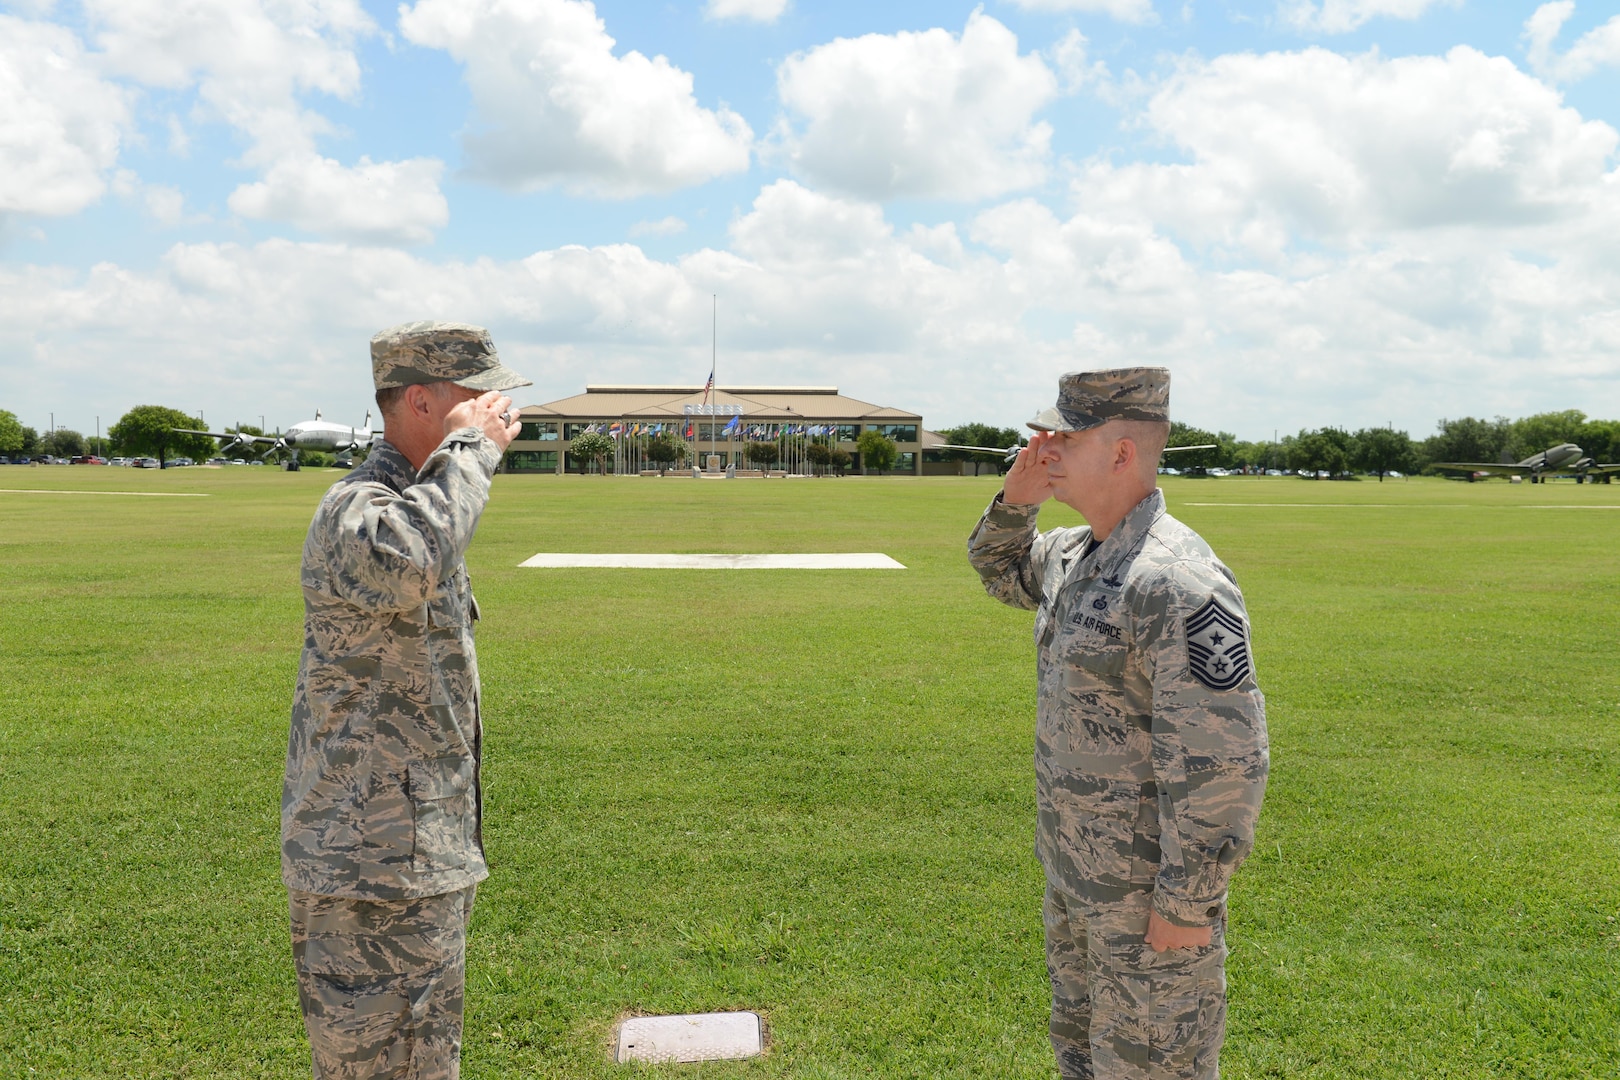 "Chief Master Sgt. Brendan Criswell, Command Chief, 24th Air Force, salutes Maj. Gen. Ed Wilson, Commander, 24th Air Force, during the chief's final reenlistment swear-in at JBSA-Lackland 10 June. Criswell, after 27 years on active duty, is scheduled to transfer in July to serve as command chief for Air Force Space Command in Colorado Springs, Colo." (US Air Force photo by MSgt Stuart Wilson)
